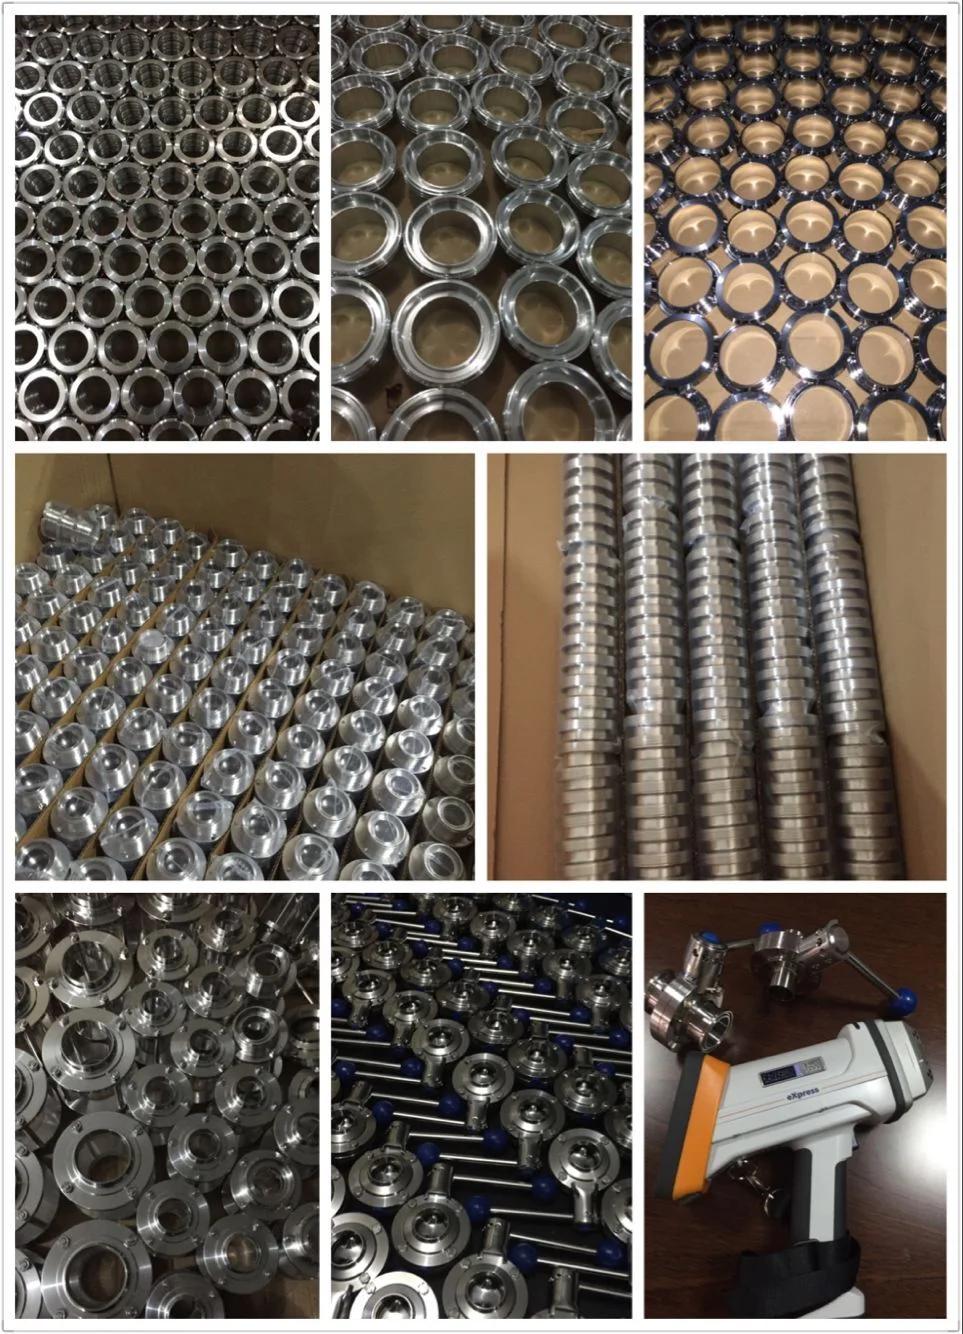 Sanitary Stainless Steel Unions